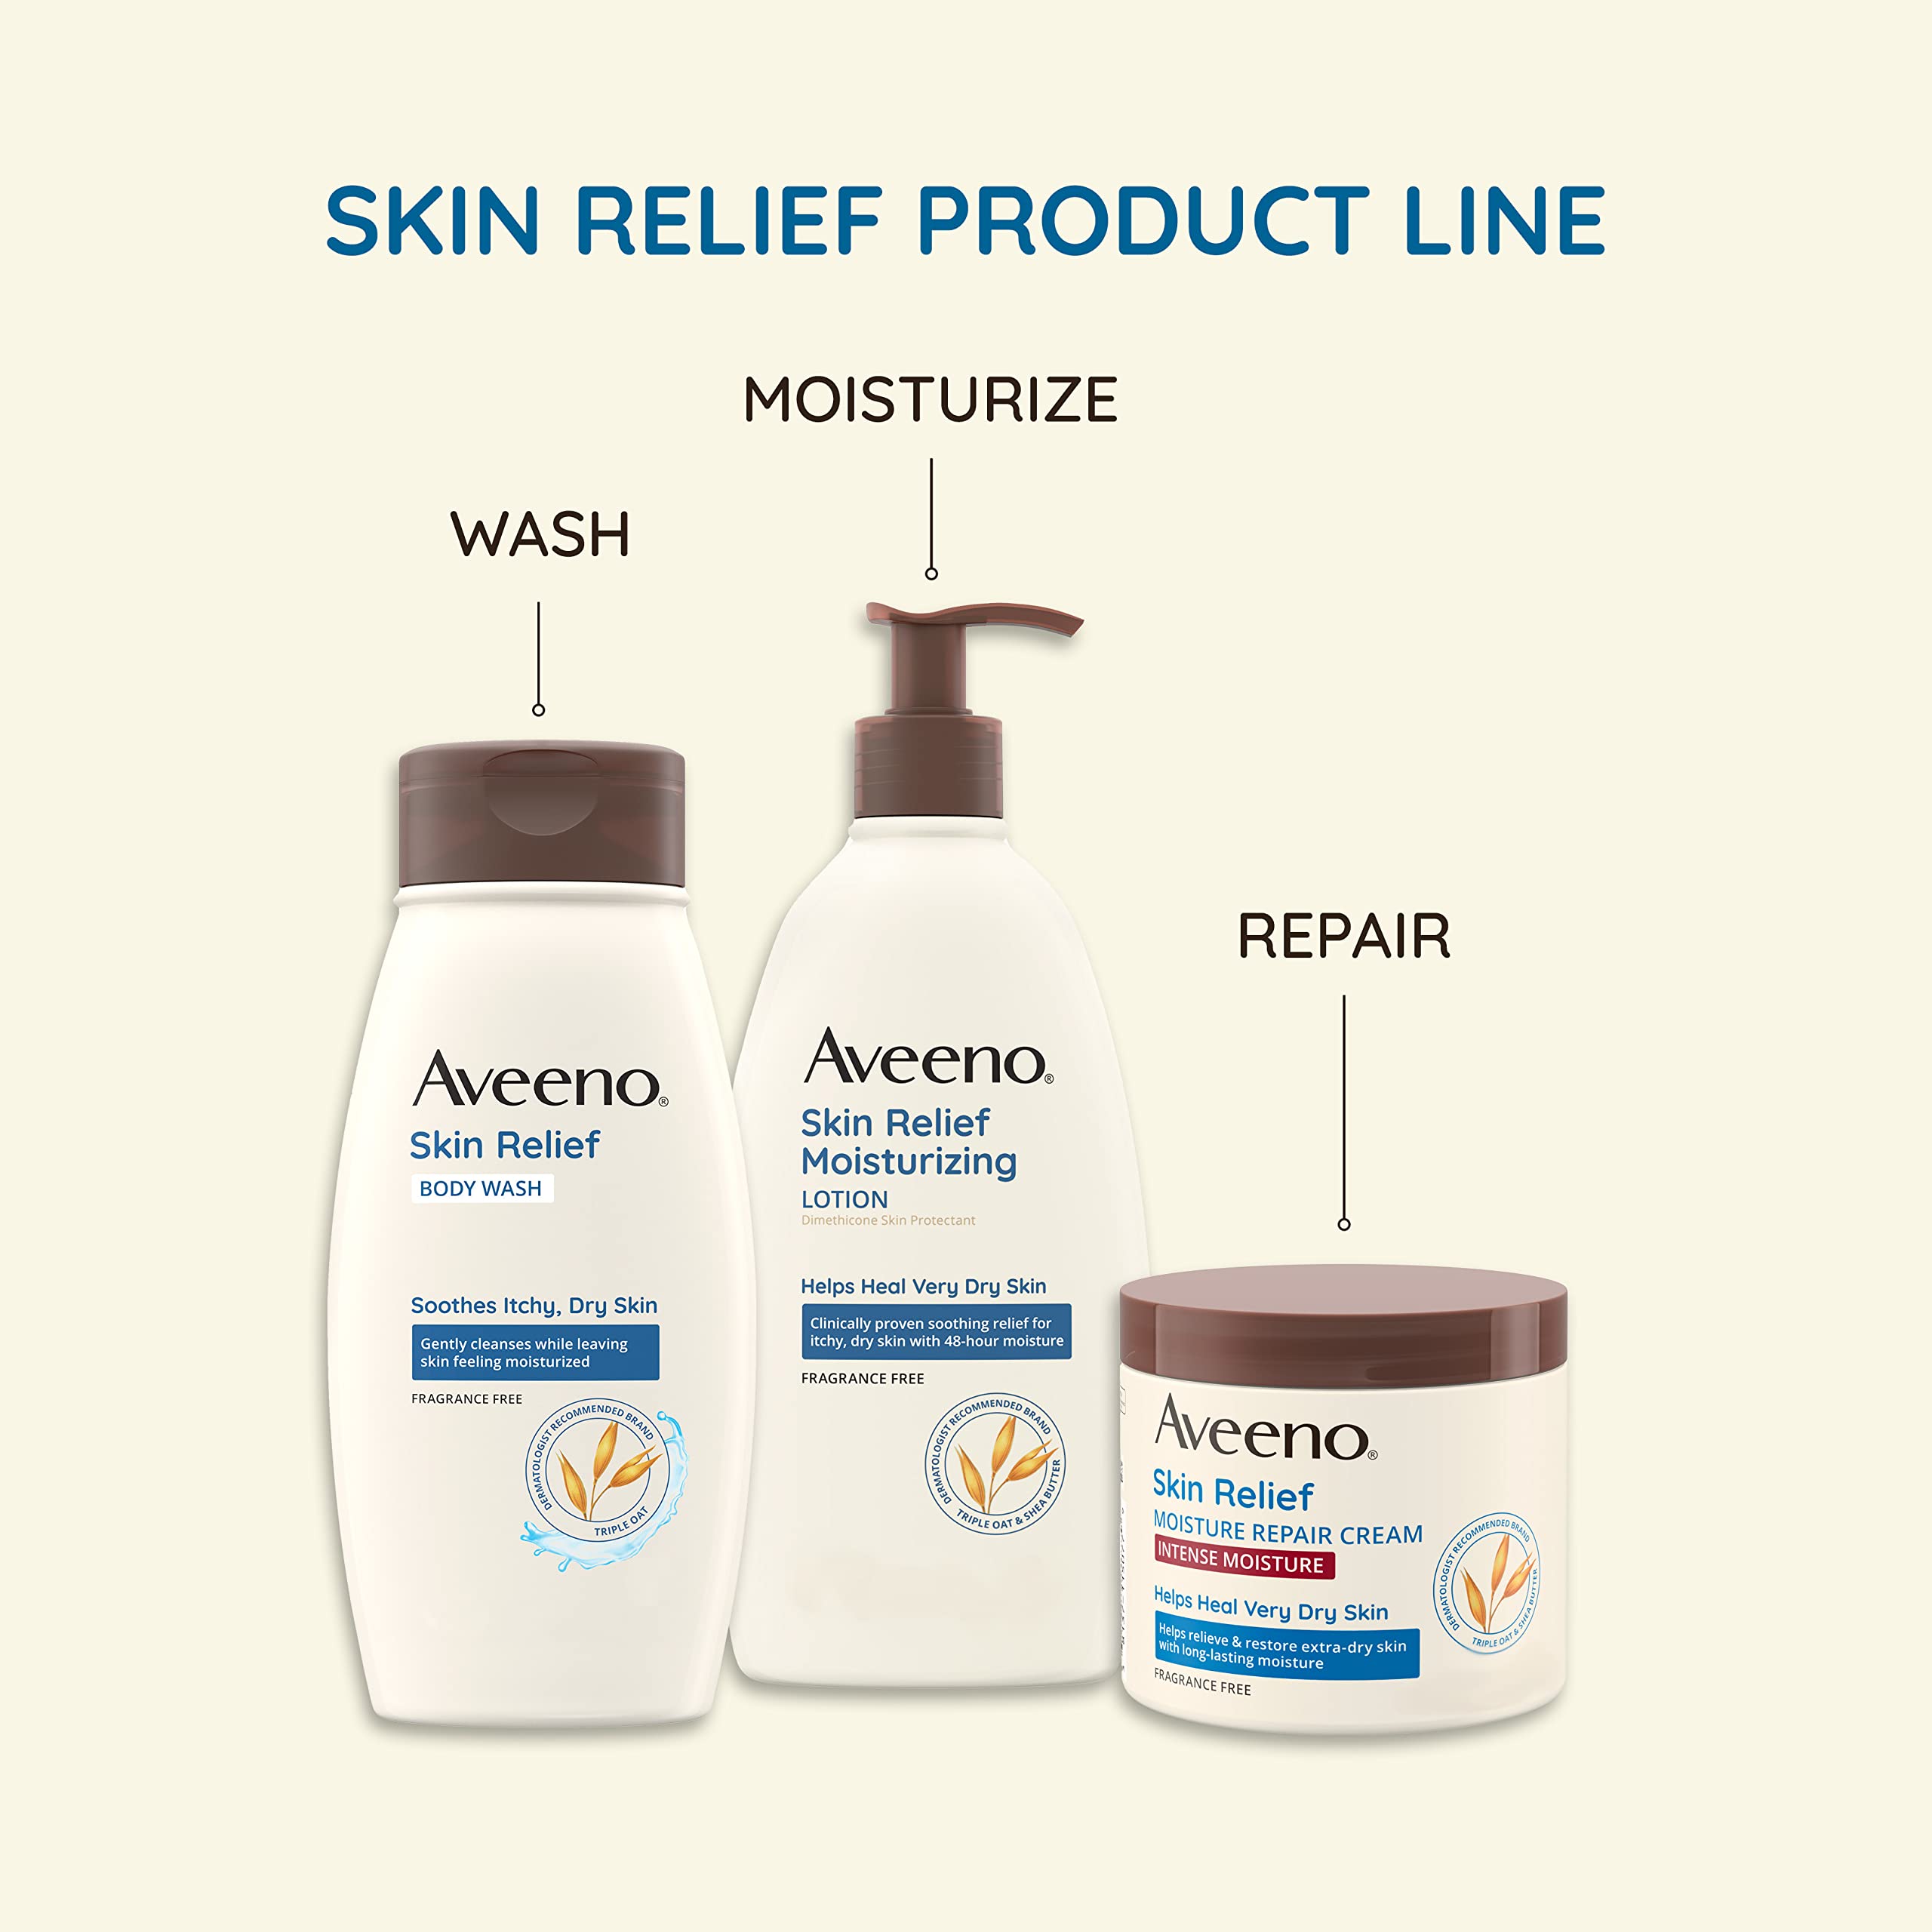 Aveeno Skin Relief Moisturizing Lotion for Very Dry Skin with Soothing Triple Oat & Shea Butter Formula, Dimethicone Skin Protectant Helps Heal Itchy, Dry Skin, Fragrance-Free, 18 fl. oz